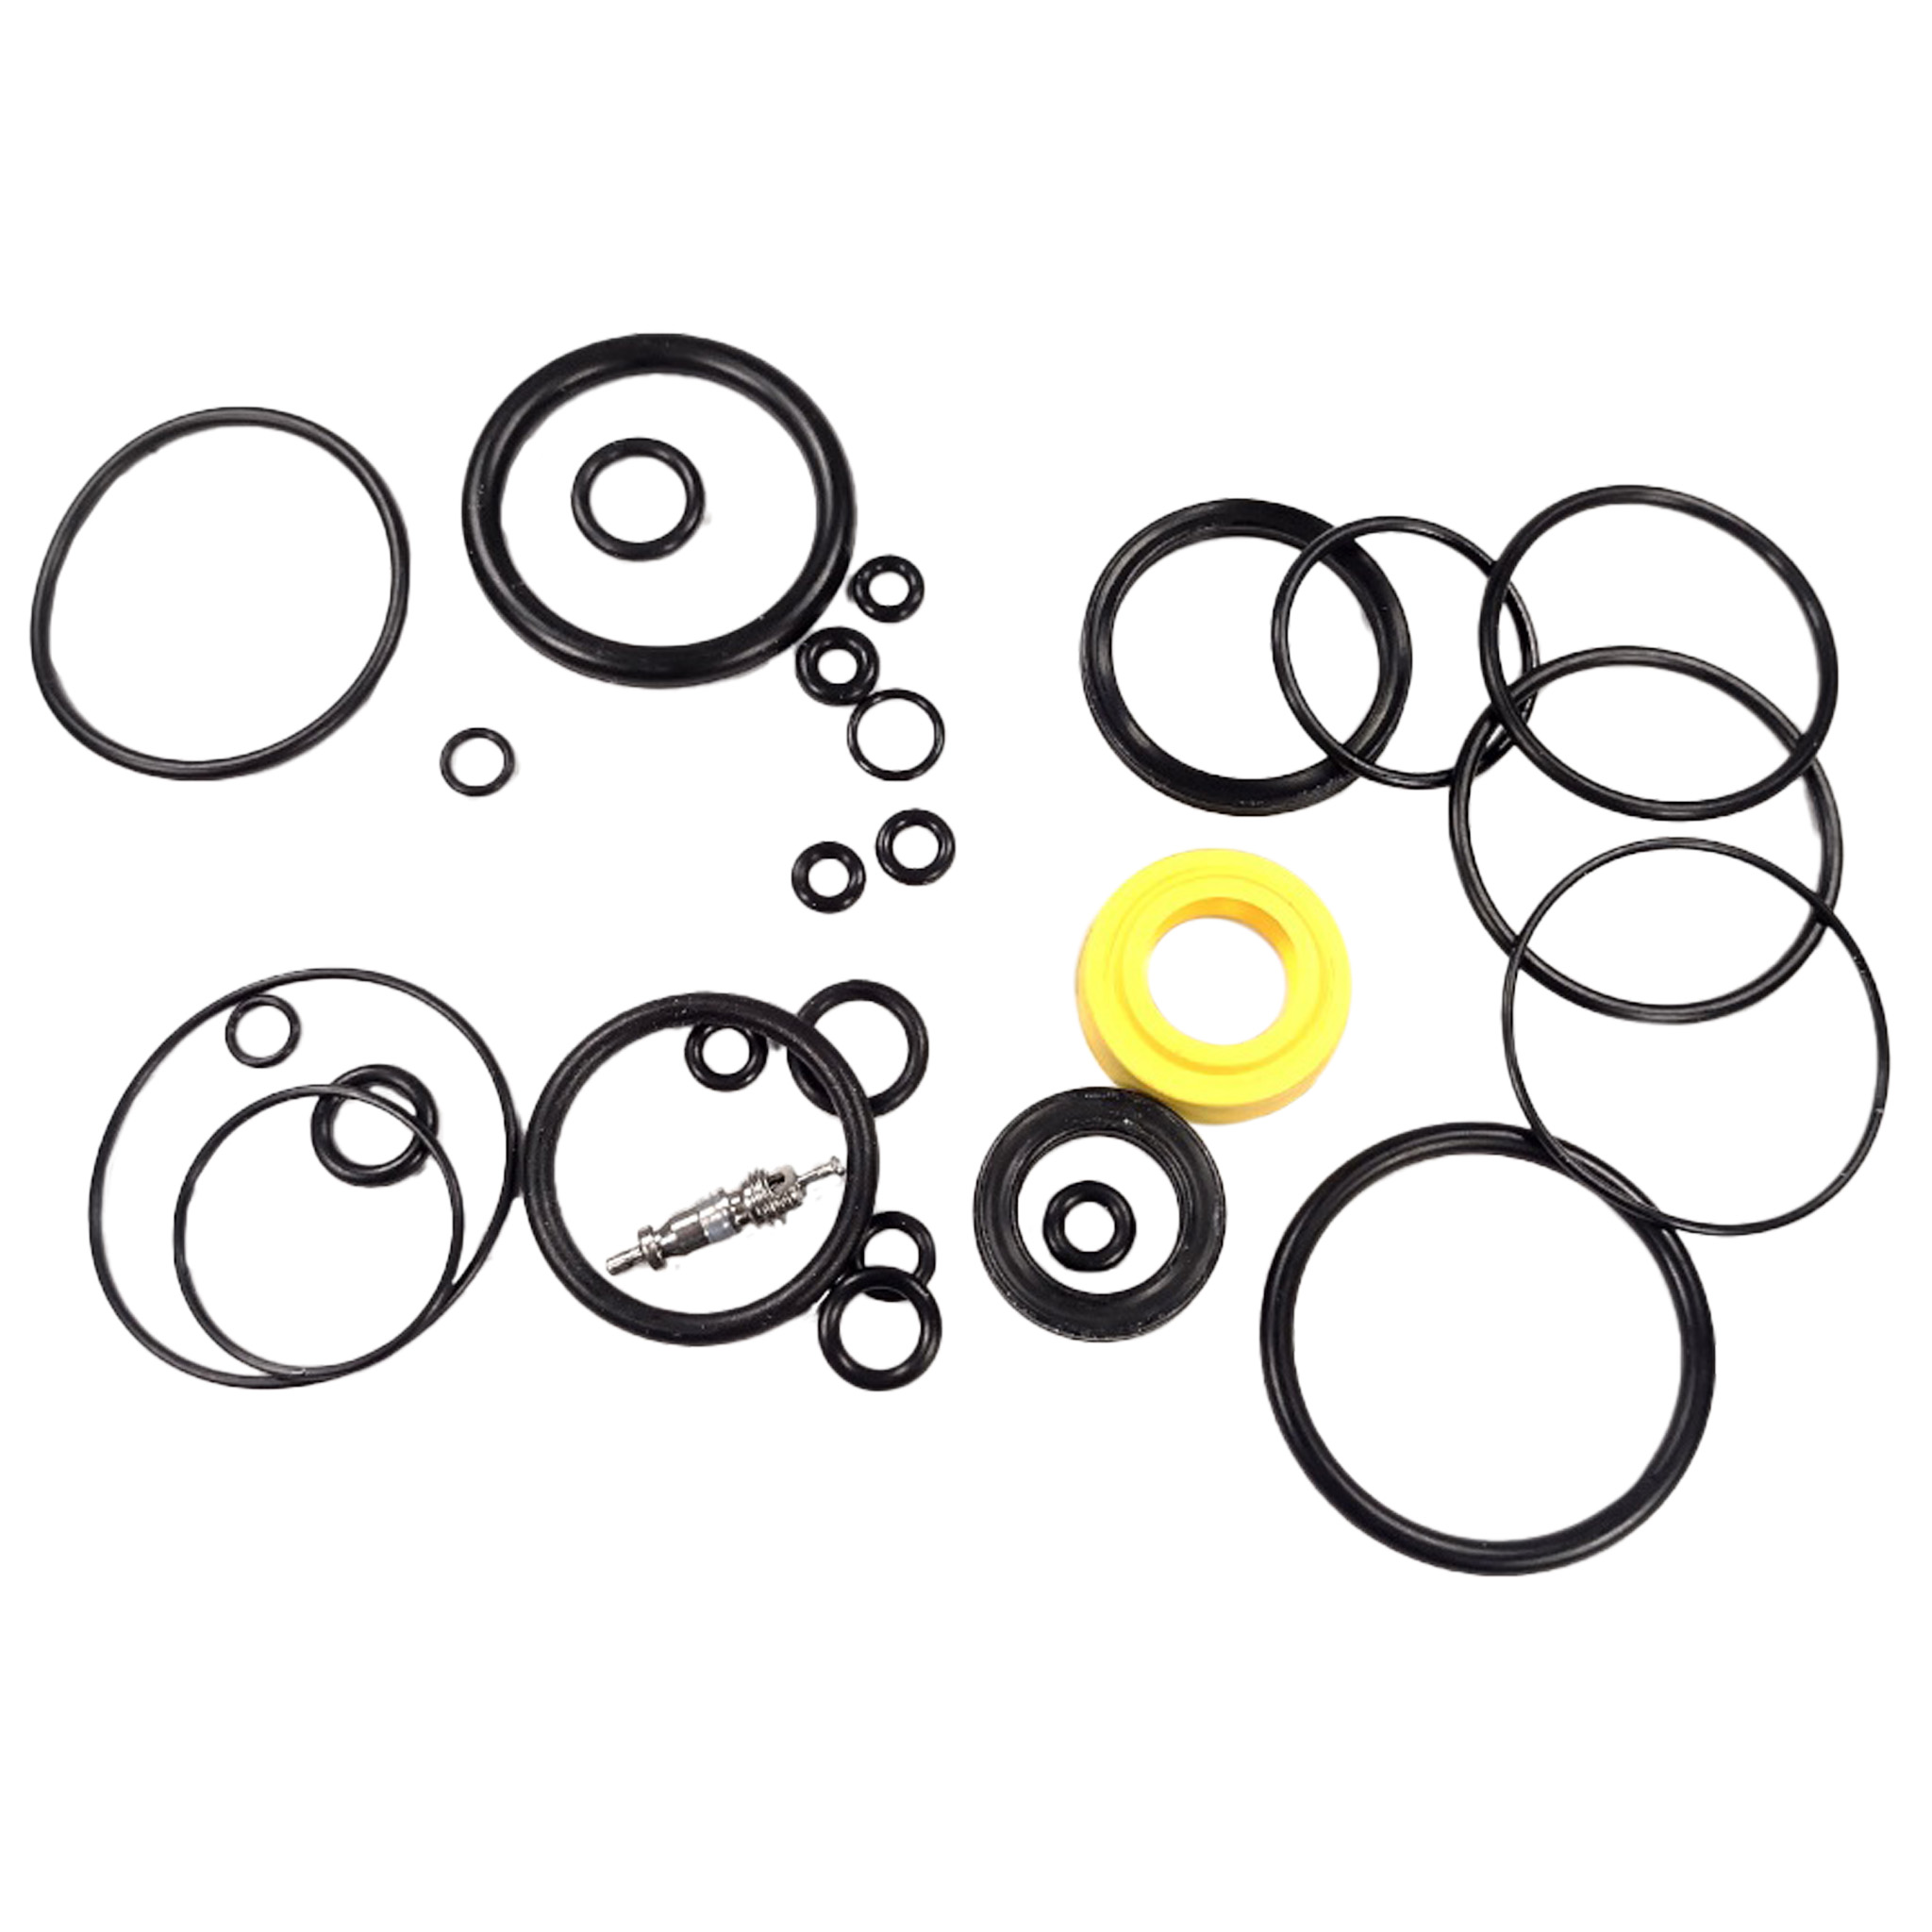 Anso Suspension RockShox Super Deluxe Coil Shock Seal Kit